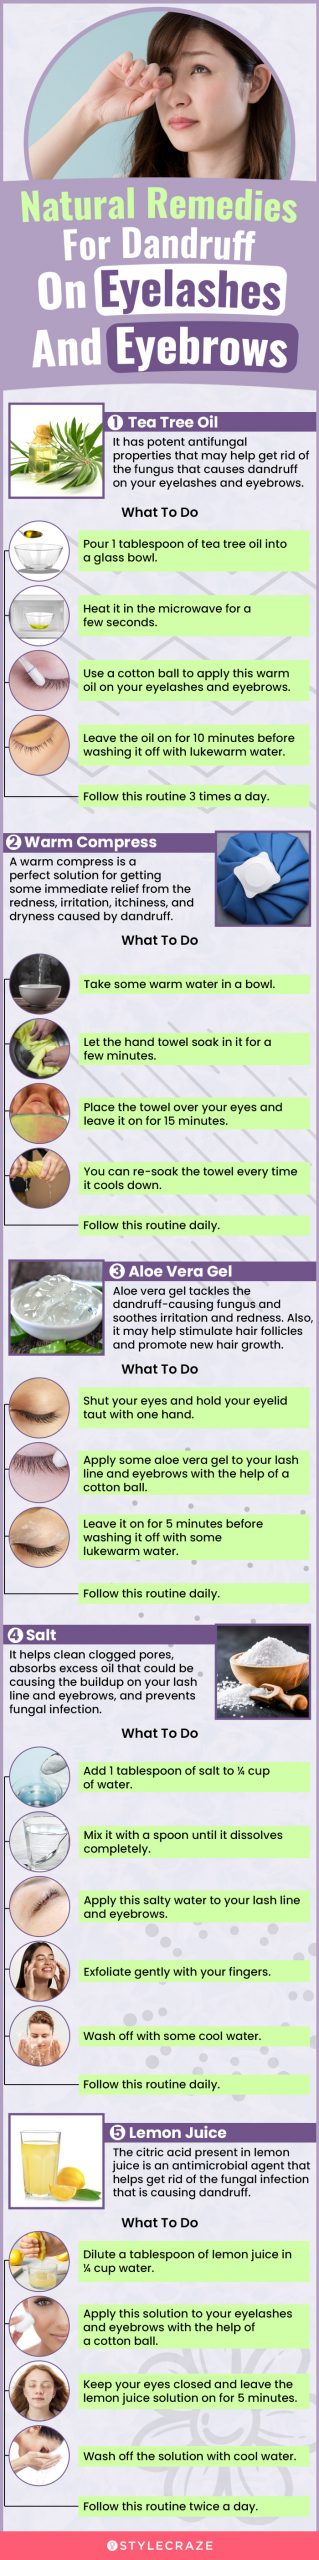 natural remedies for dandruff on eyelashes and eyebrows (infographic)